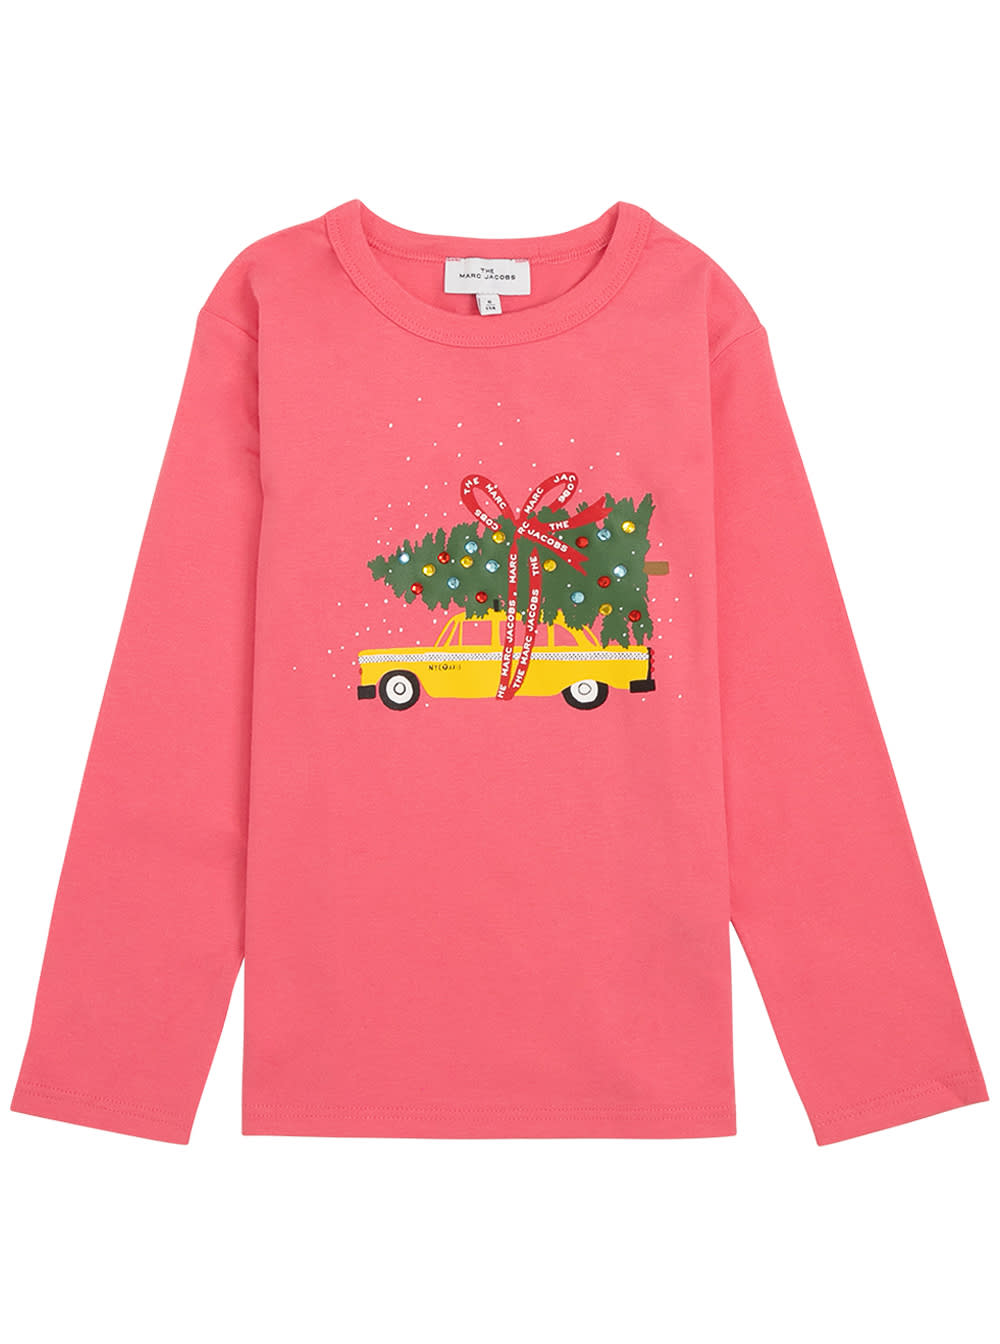 Marc Jacobs Long Sleeved Shirt With Print